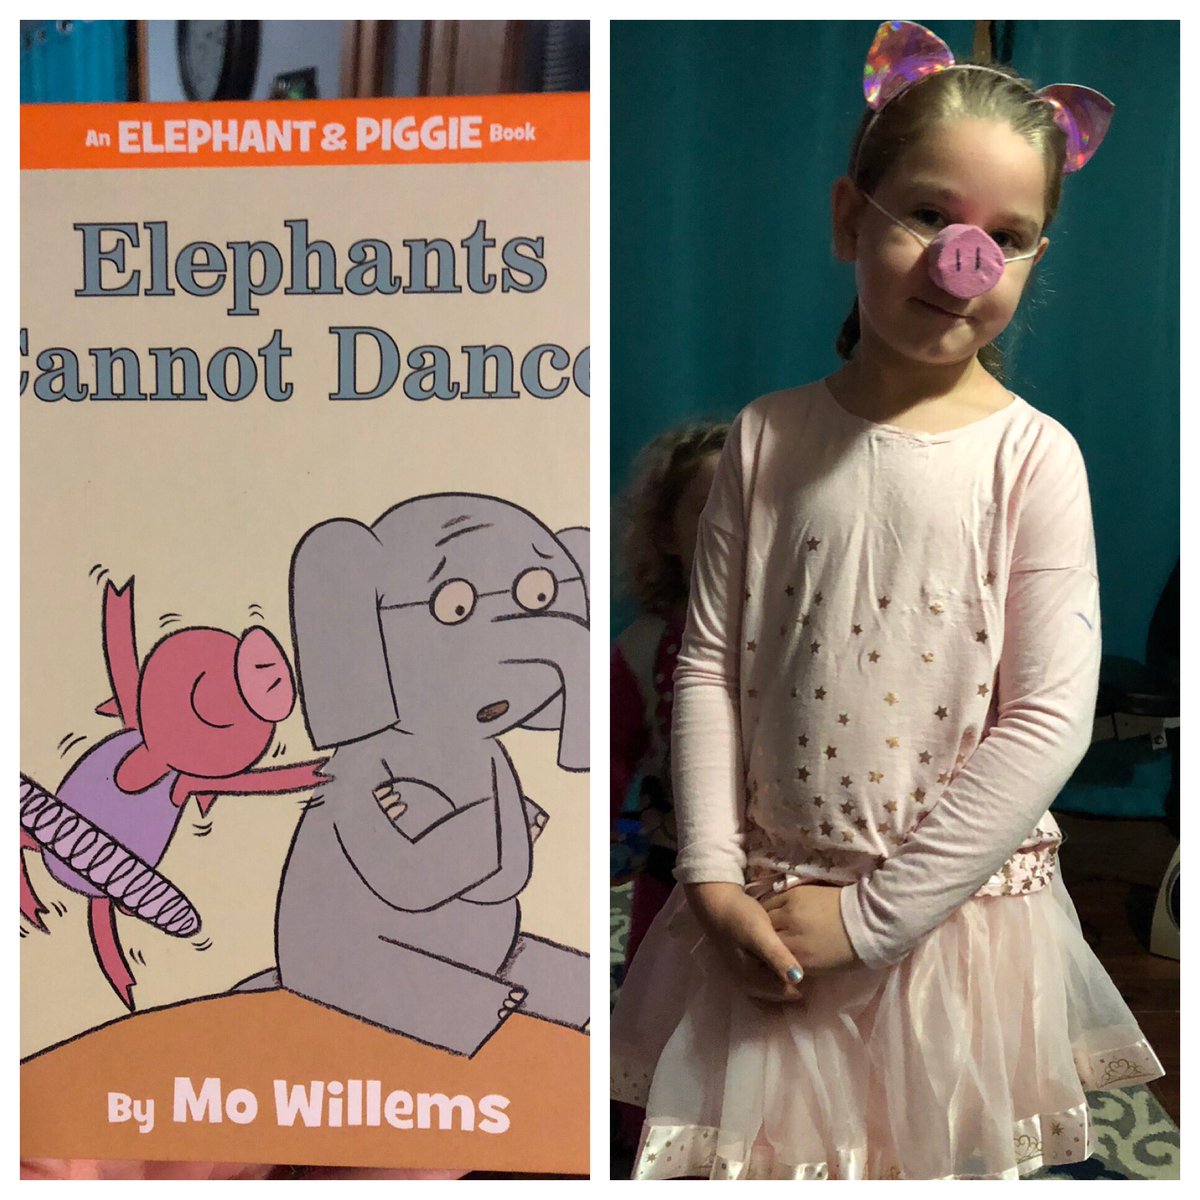 All ready for “dress like your favorite book character day” @CPElem #elephantandpiggie #firstgrade